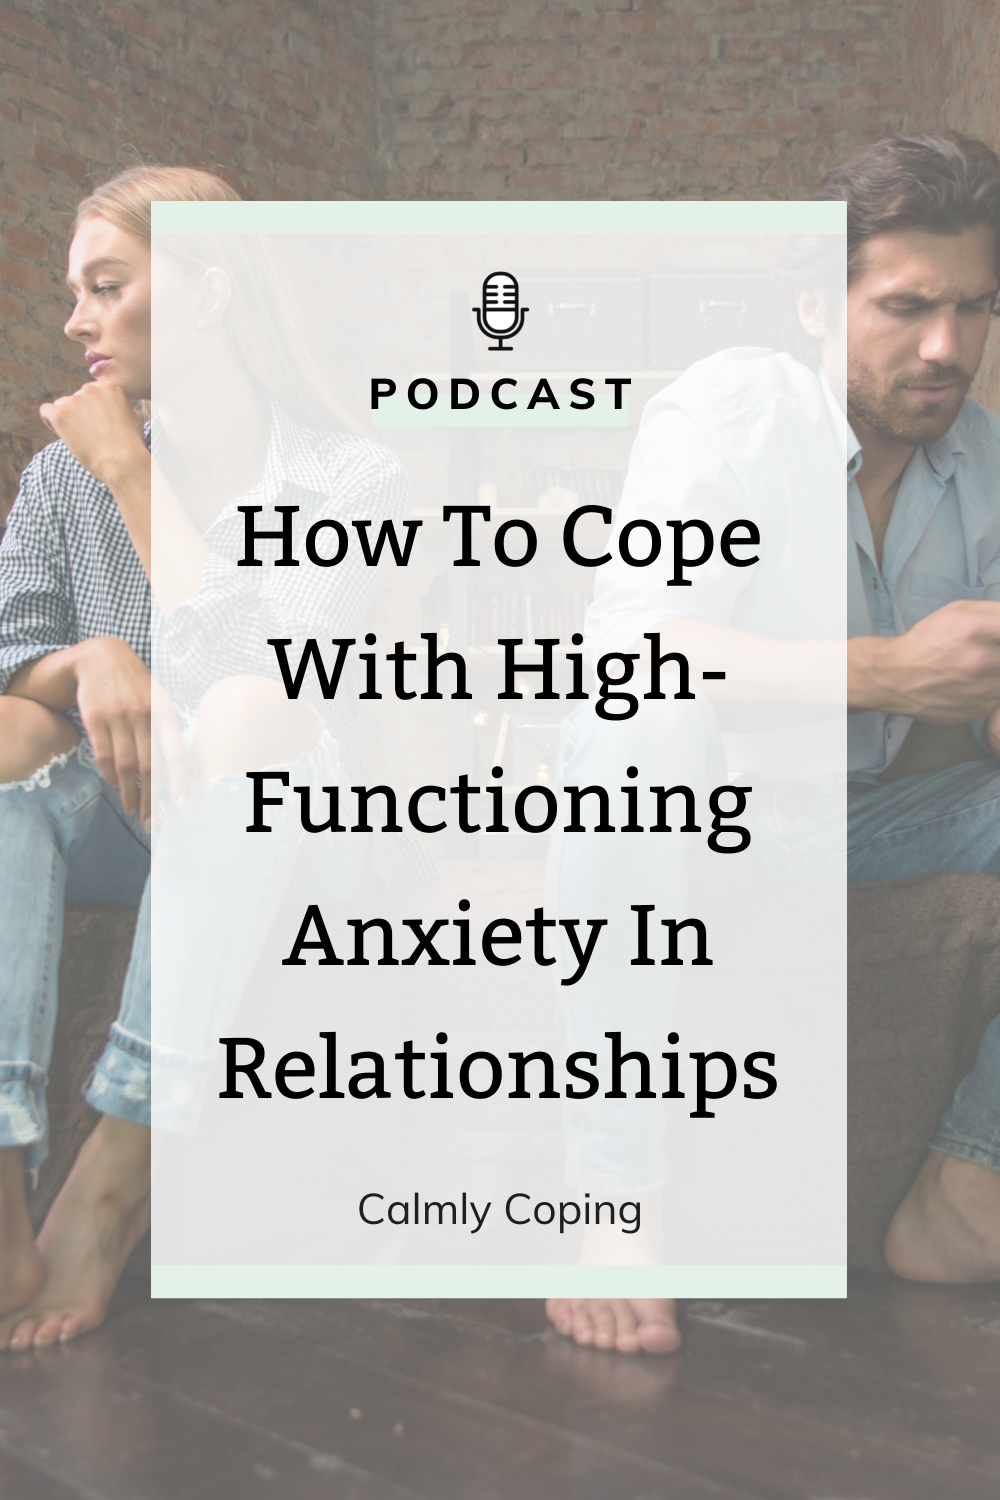 How To Cope With High-Functioning Anxiety In Relationships